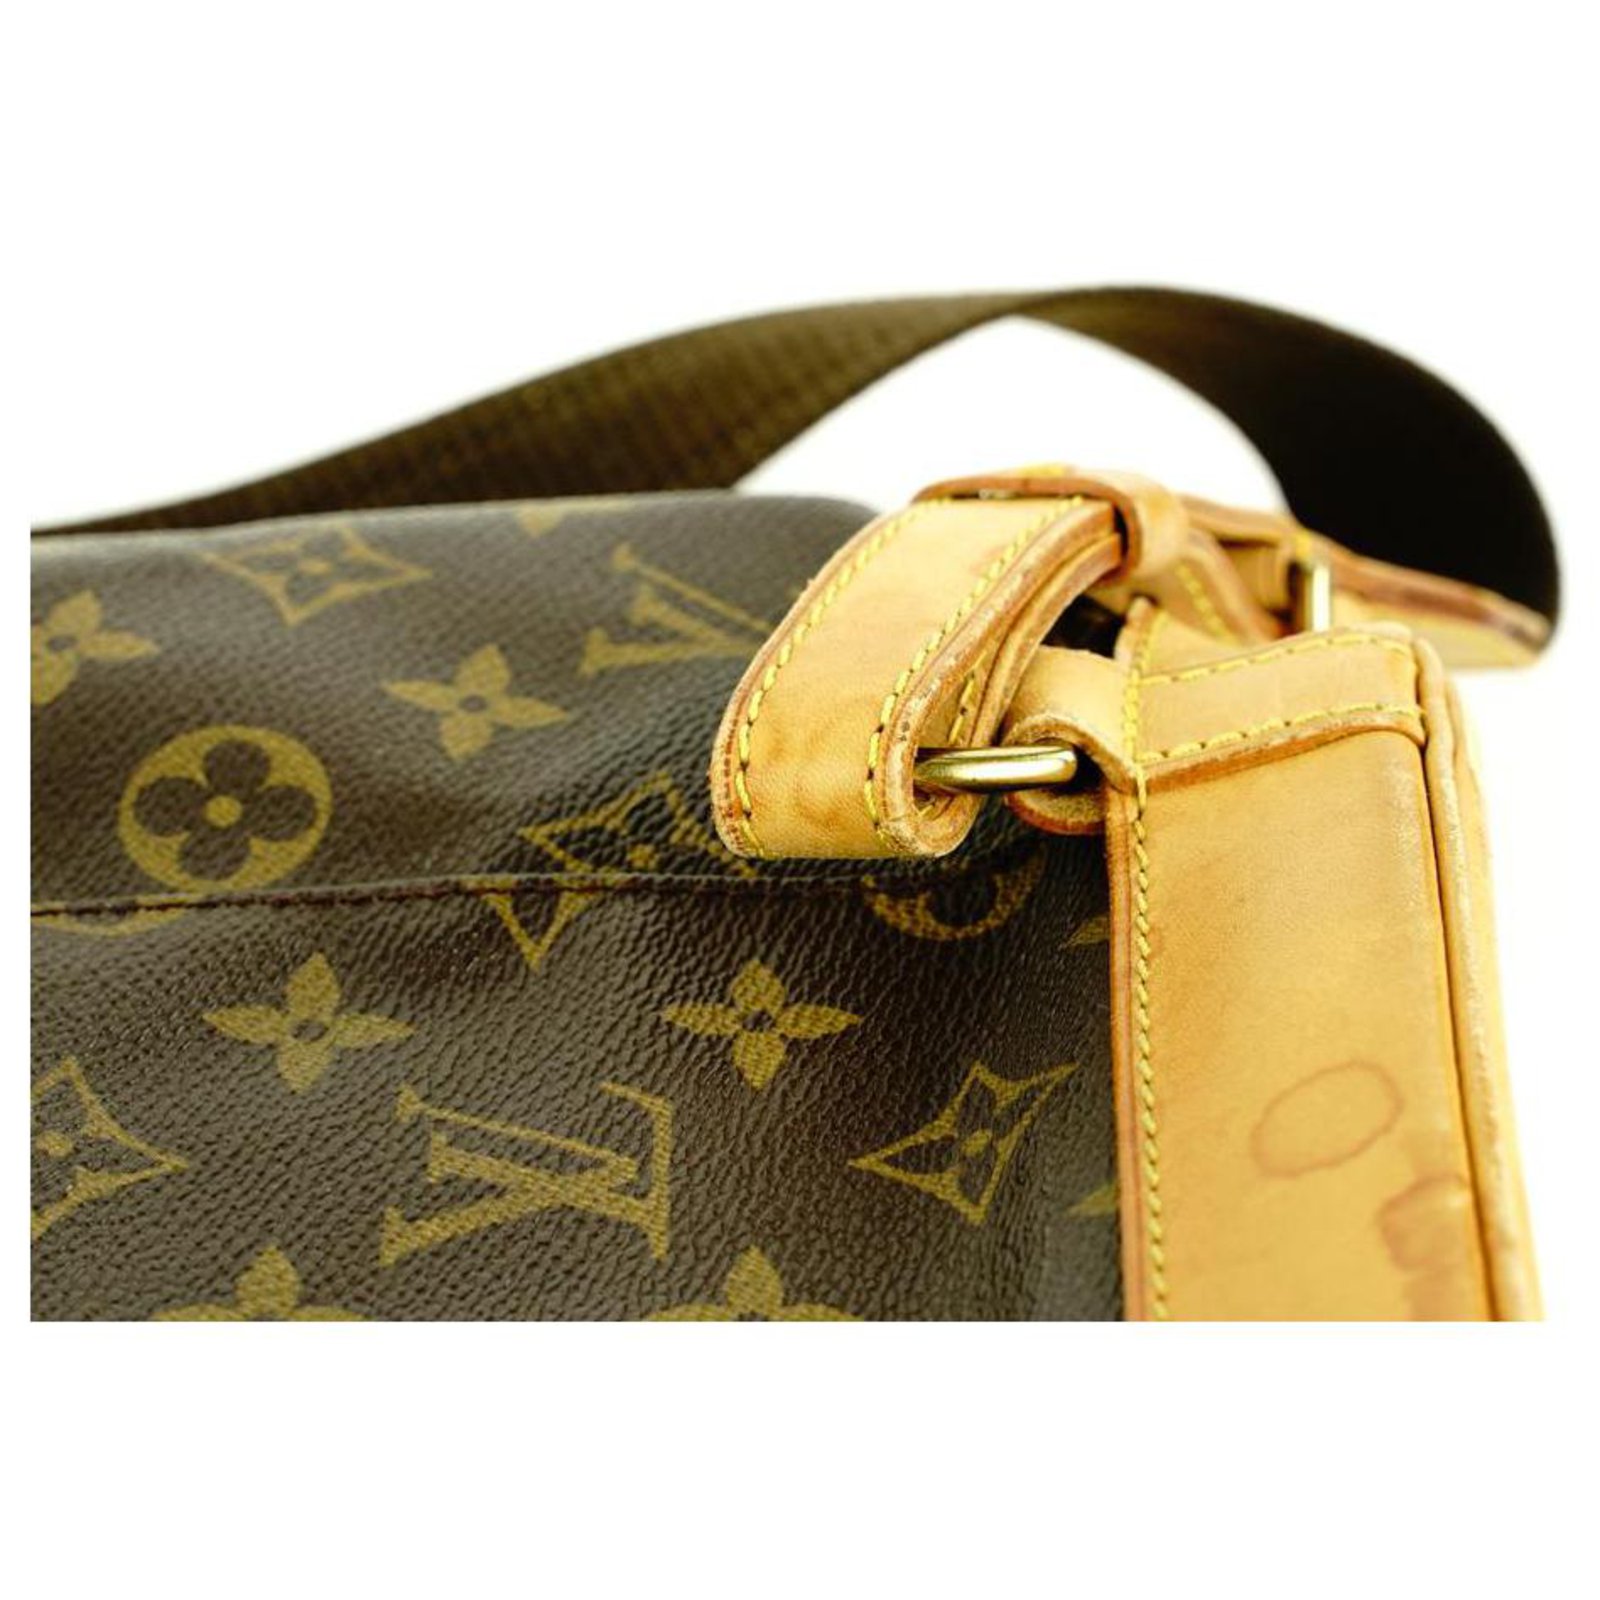 LOUIS VUITTON Monogram Montsouris GM Backpack – The Luxury Lady